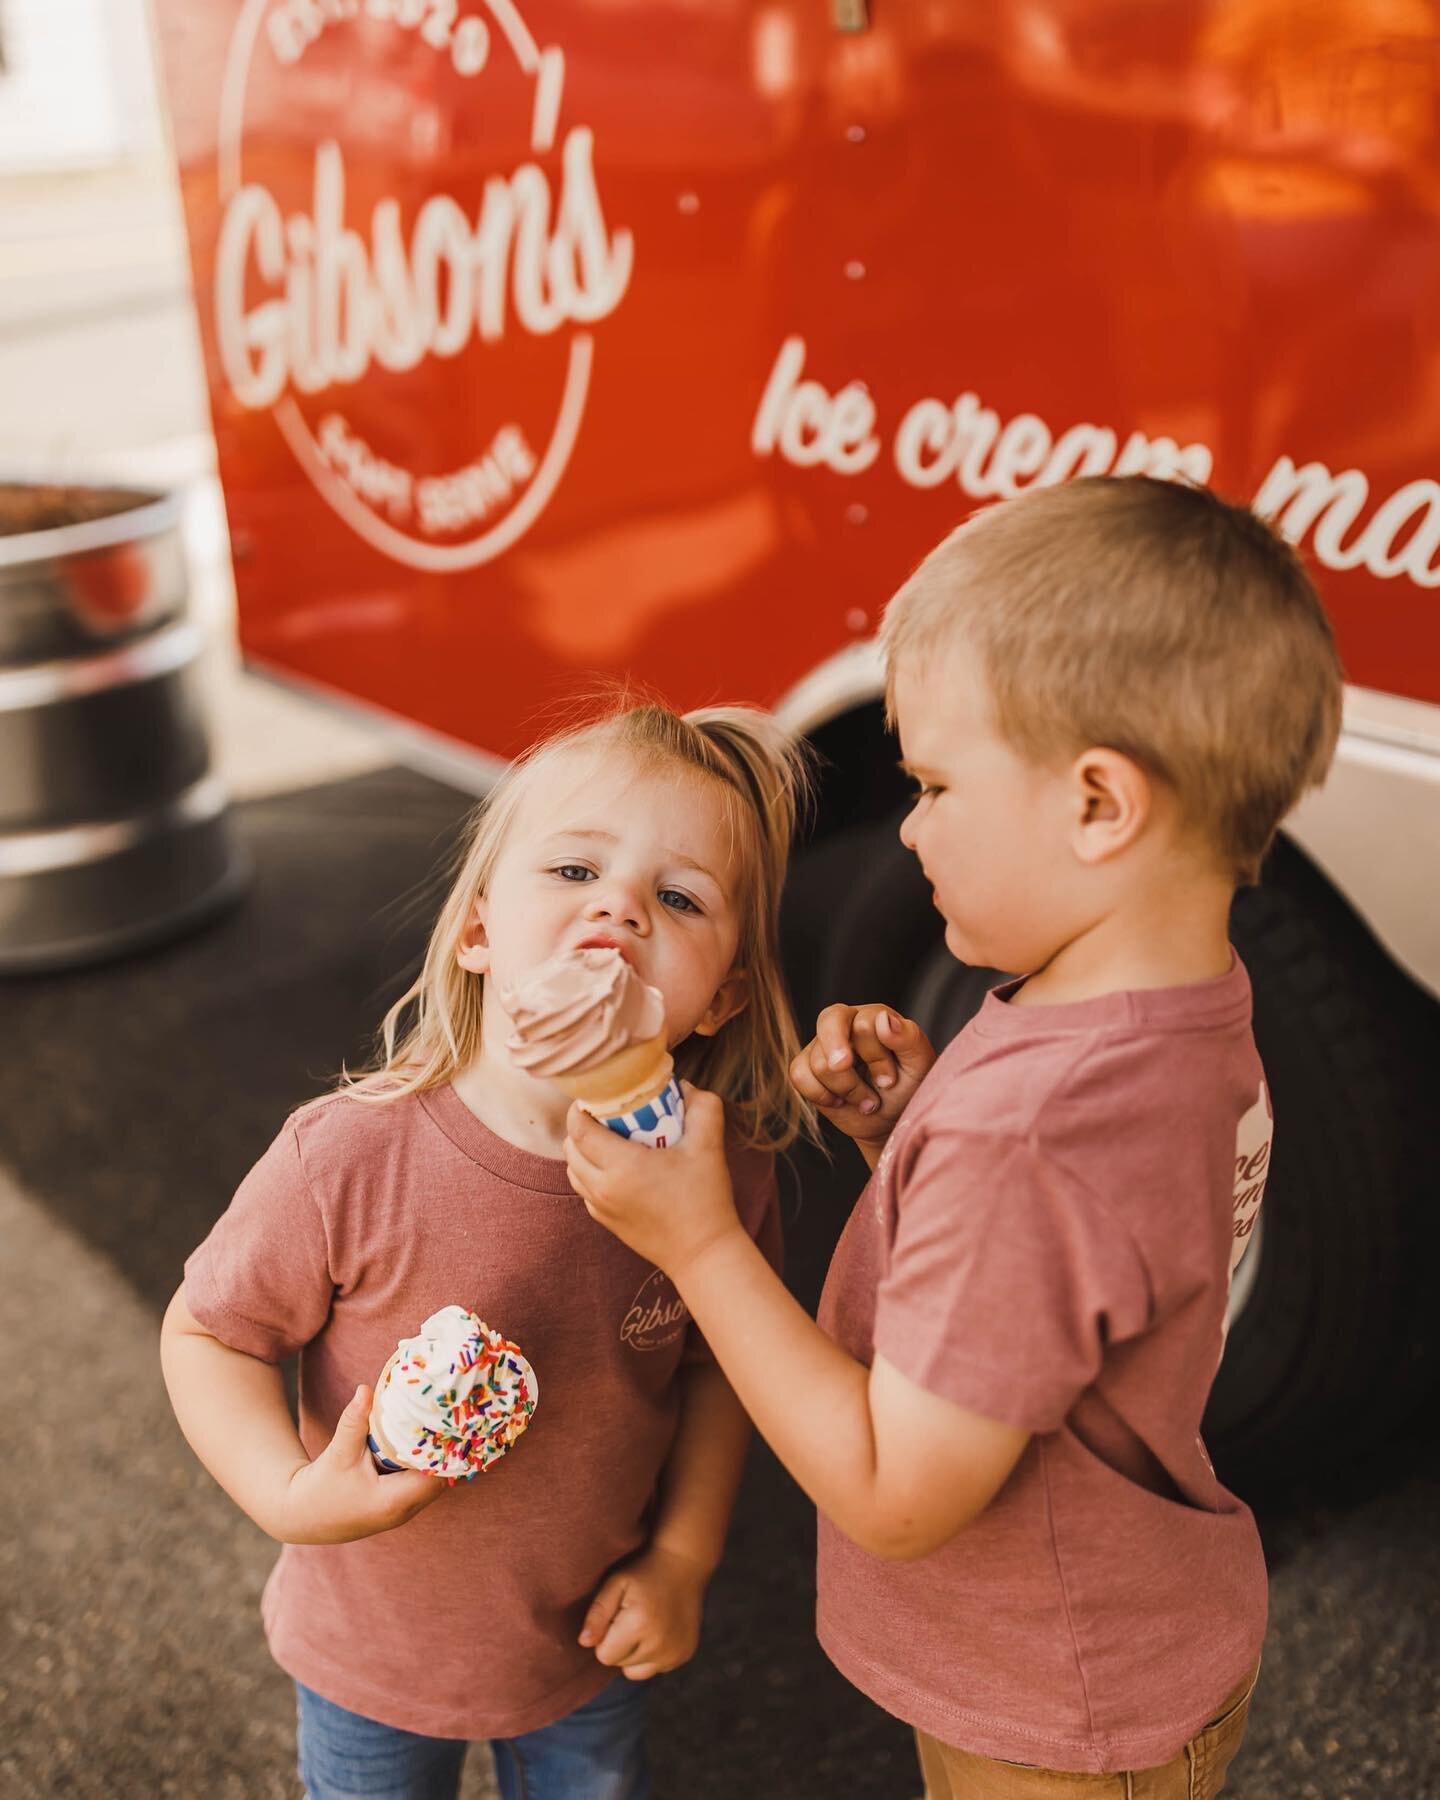 This is it y&rsquo;all&hellip; our final weekend of the season!! ❤️🍦😥 We will be open 2-9pm Thursday-Sunday, and will have plenty of ice cream to go around! We hope to see you for your final treats of the year. Let us know in the comments what your